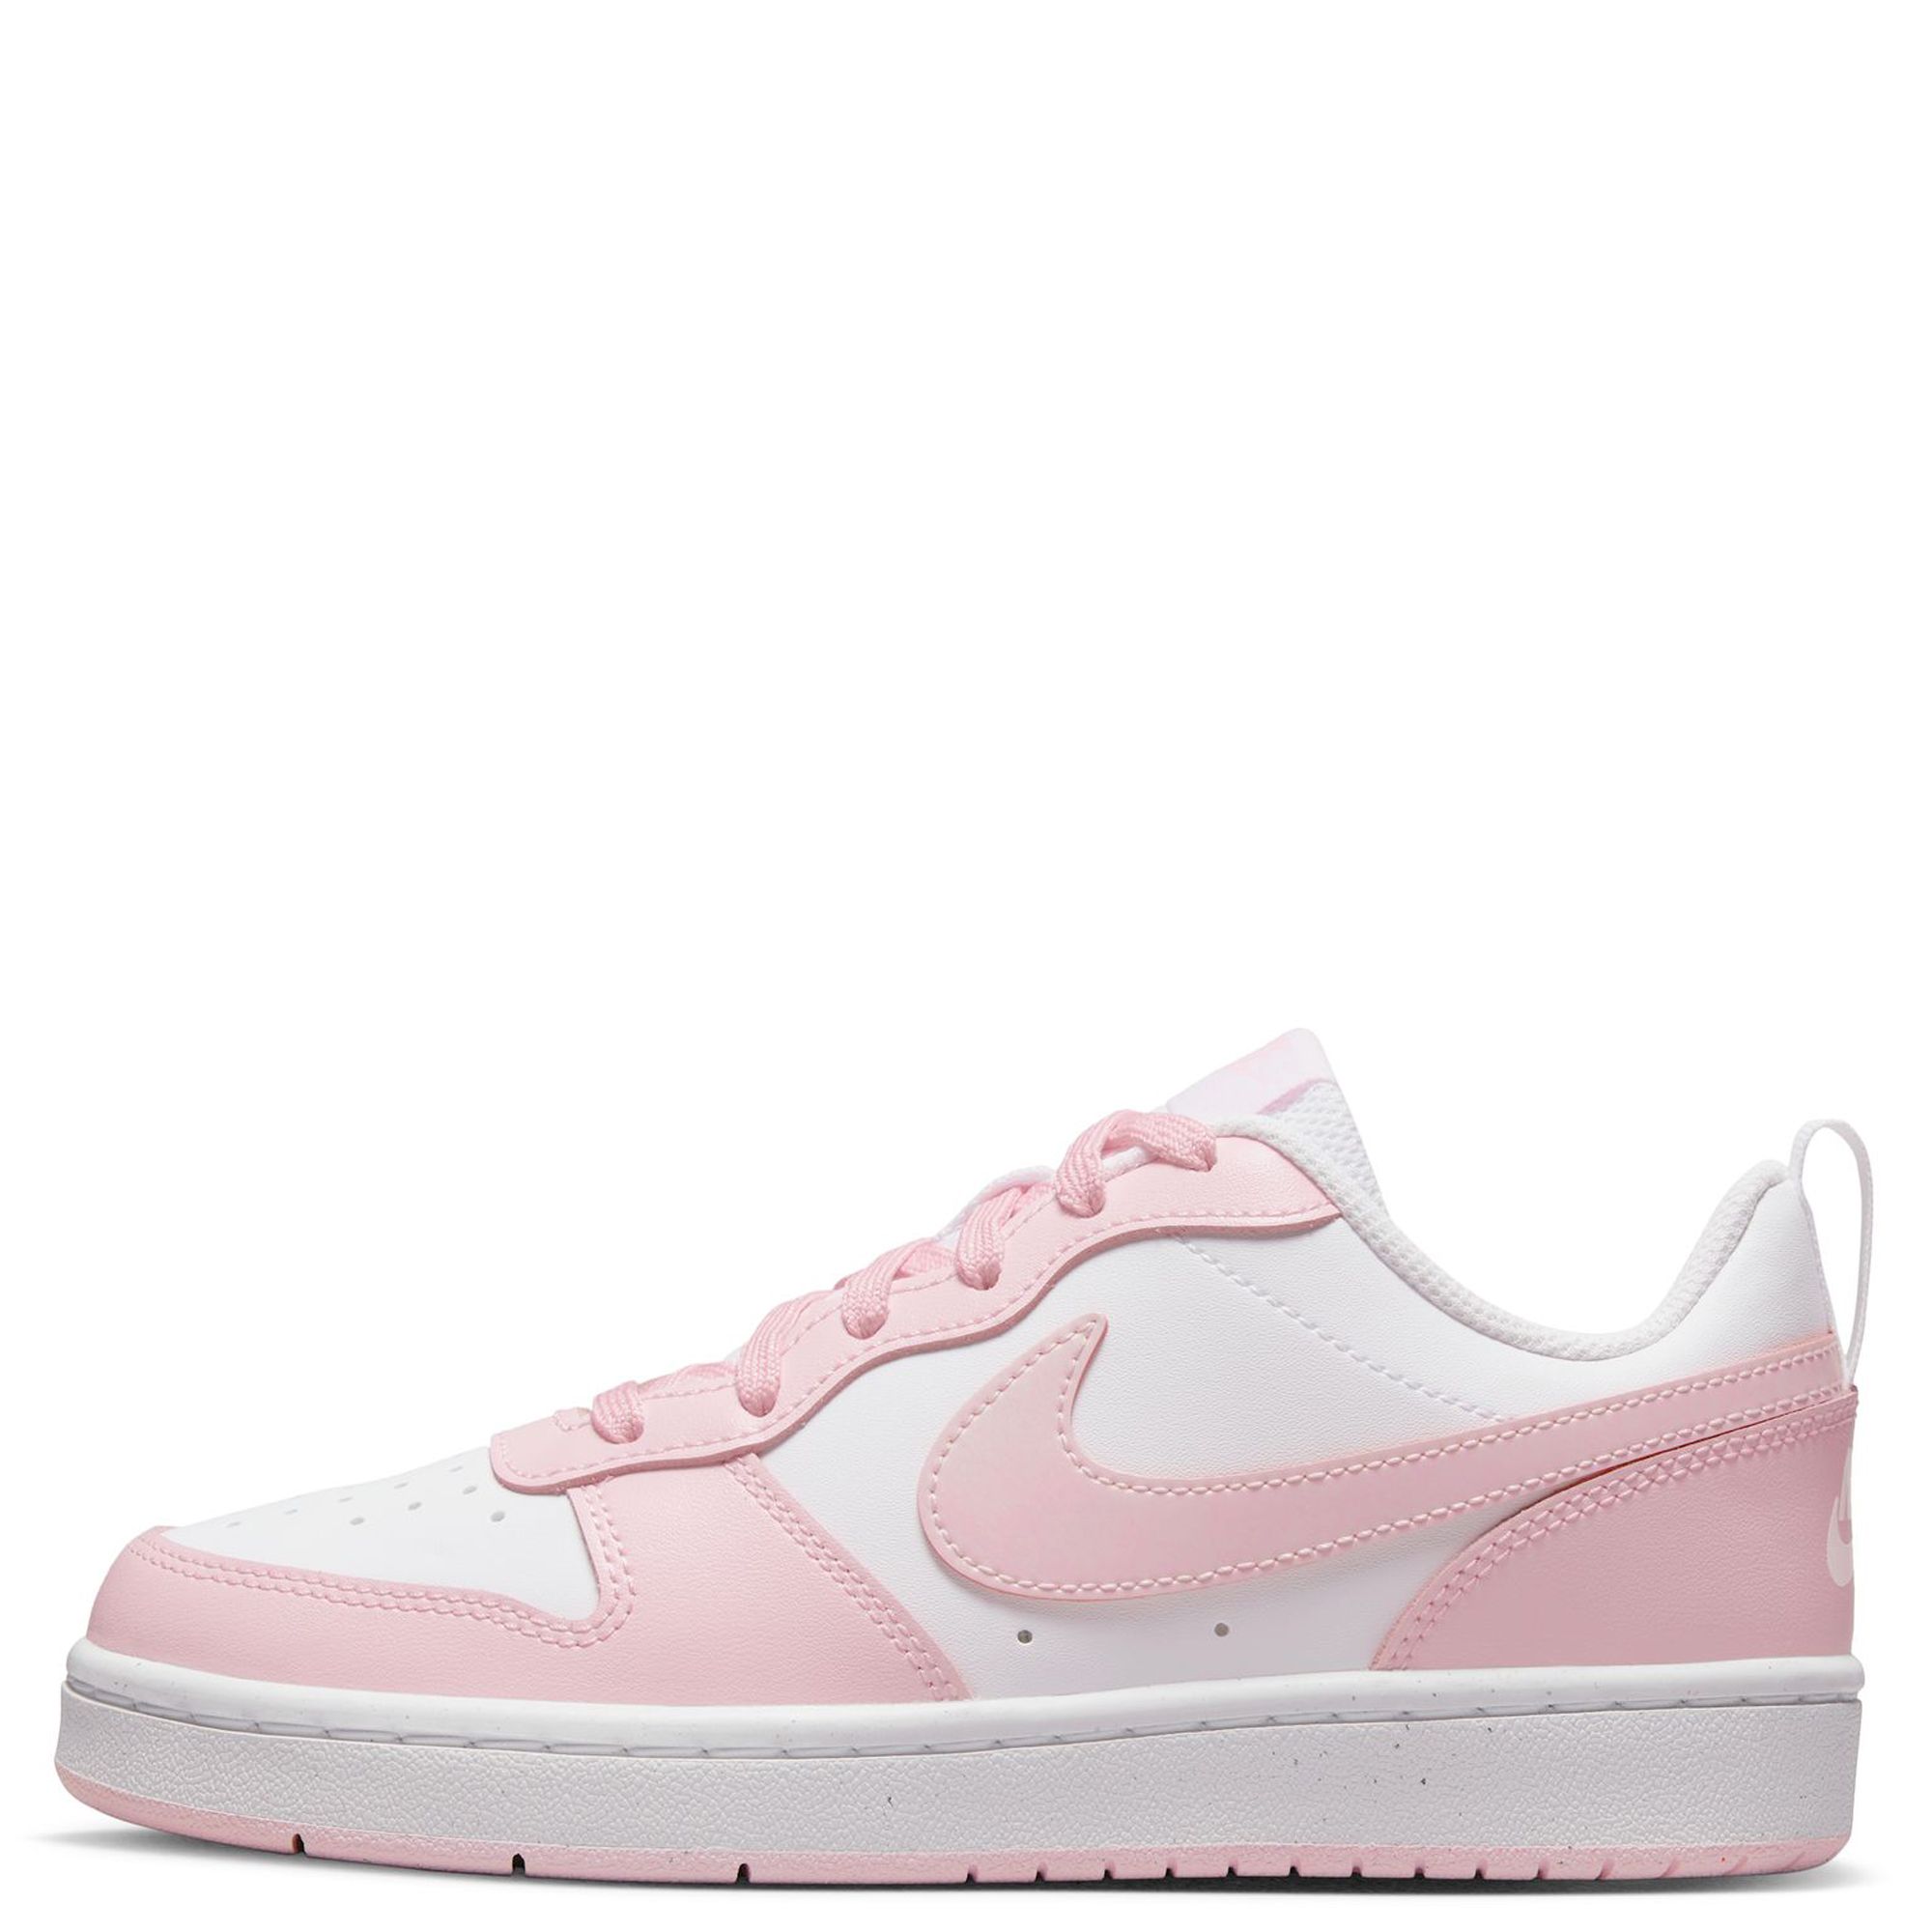 Nike SB Special Edition Court Borough Low White Pink Shoes lupon gov ph